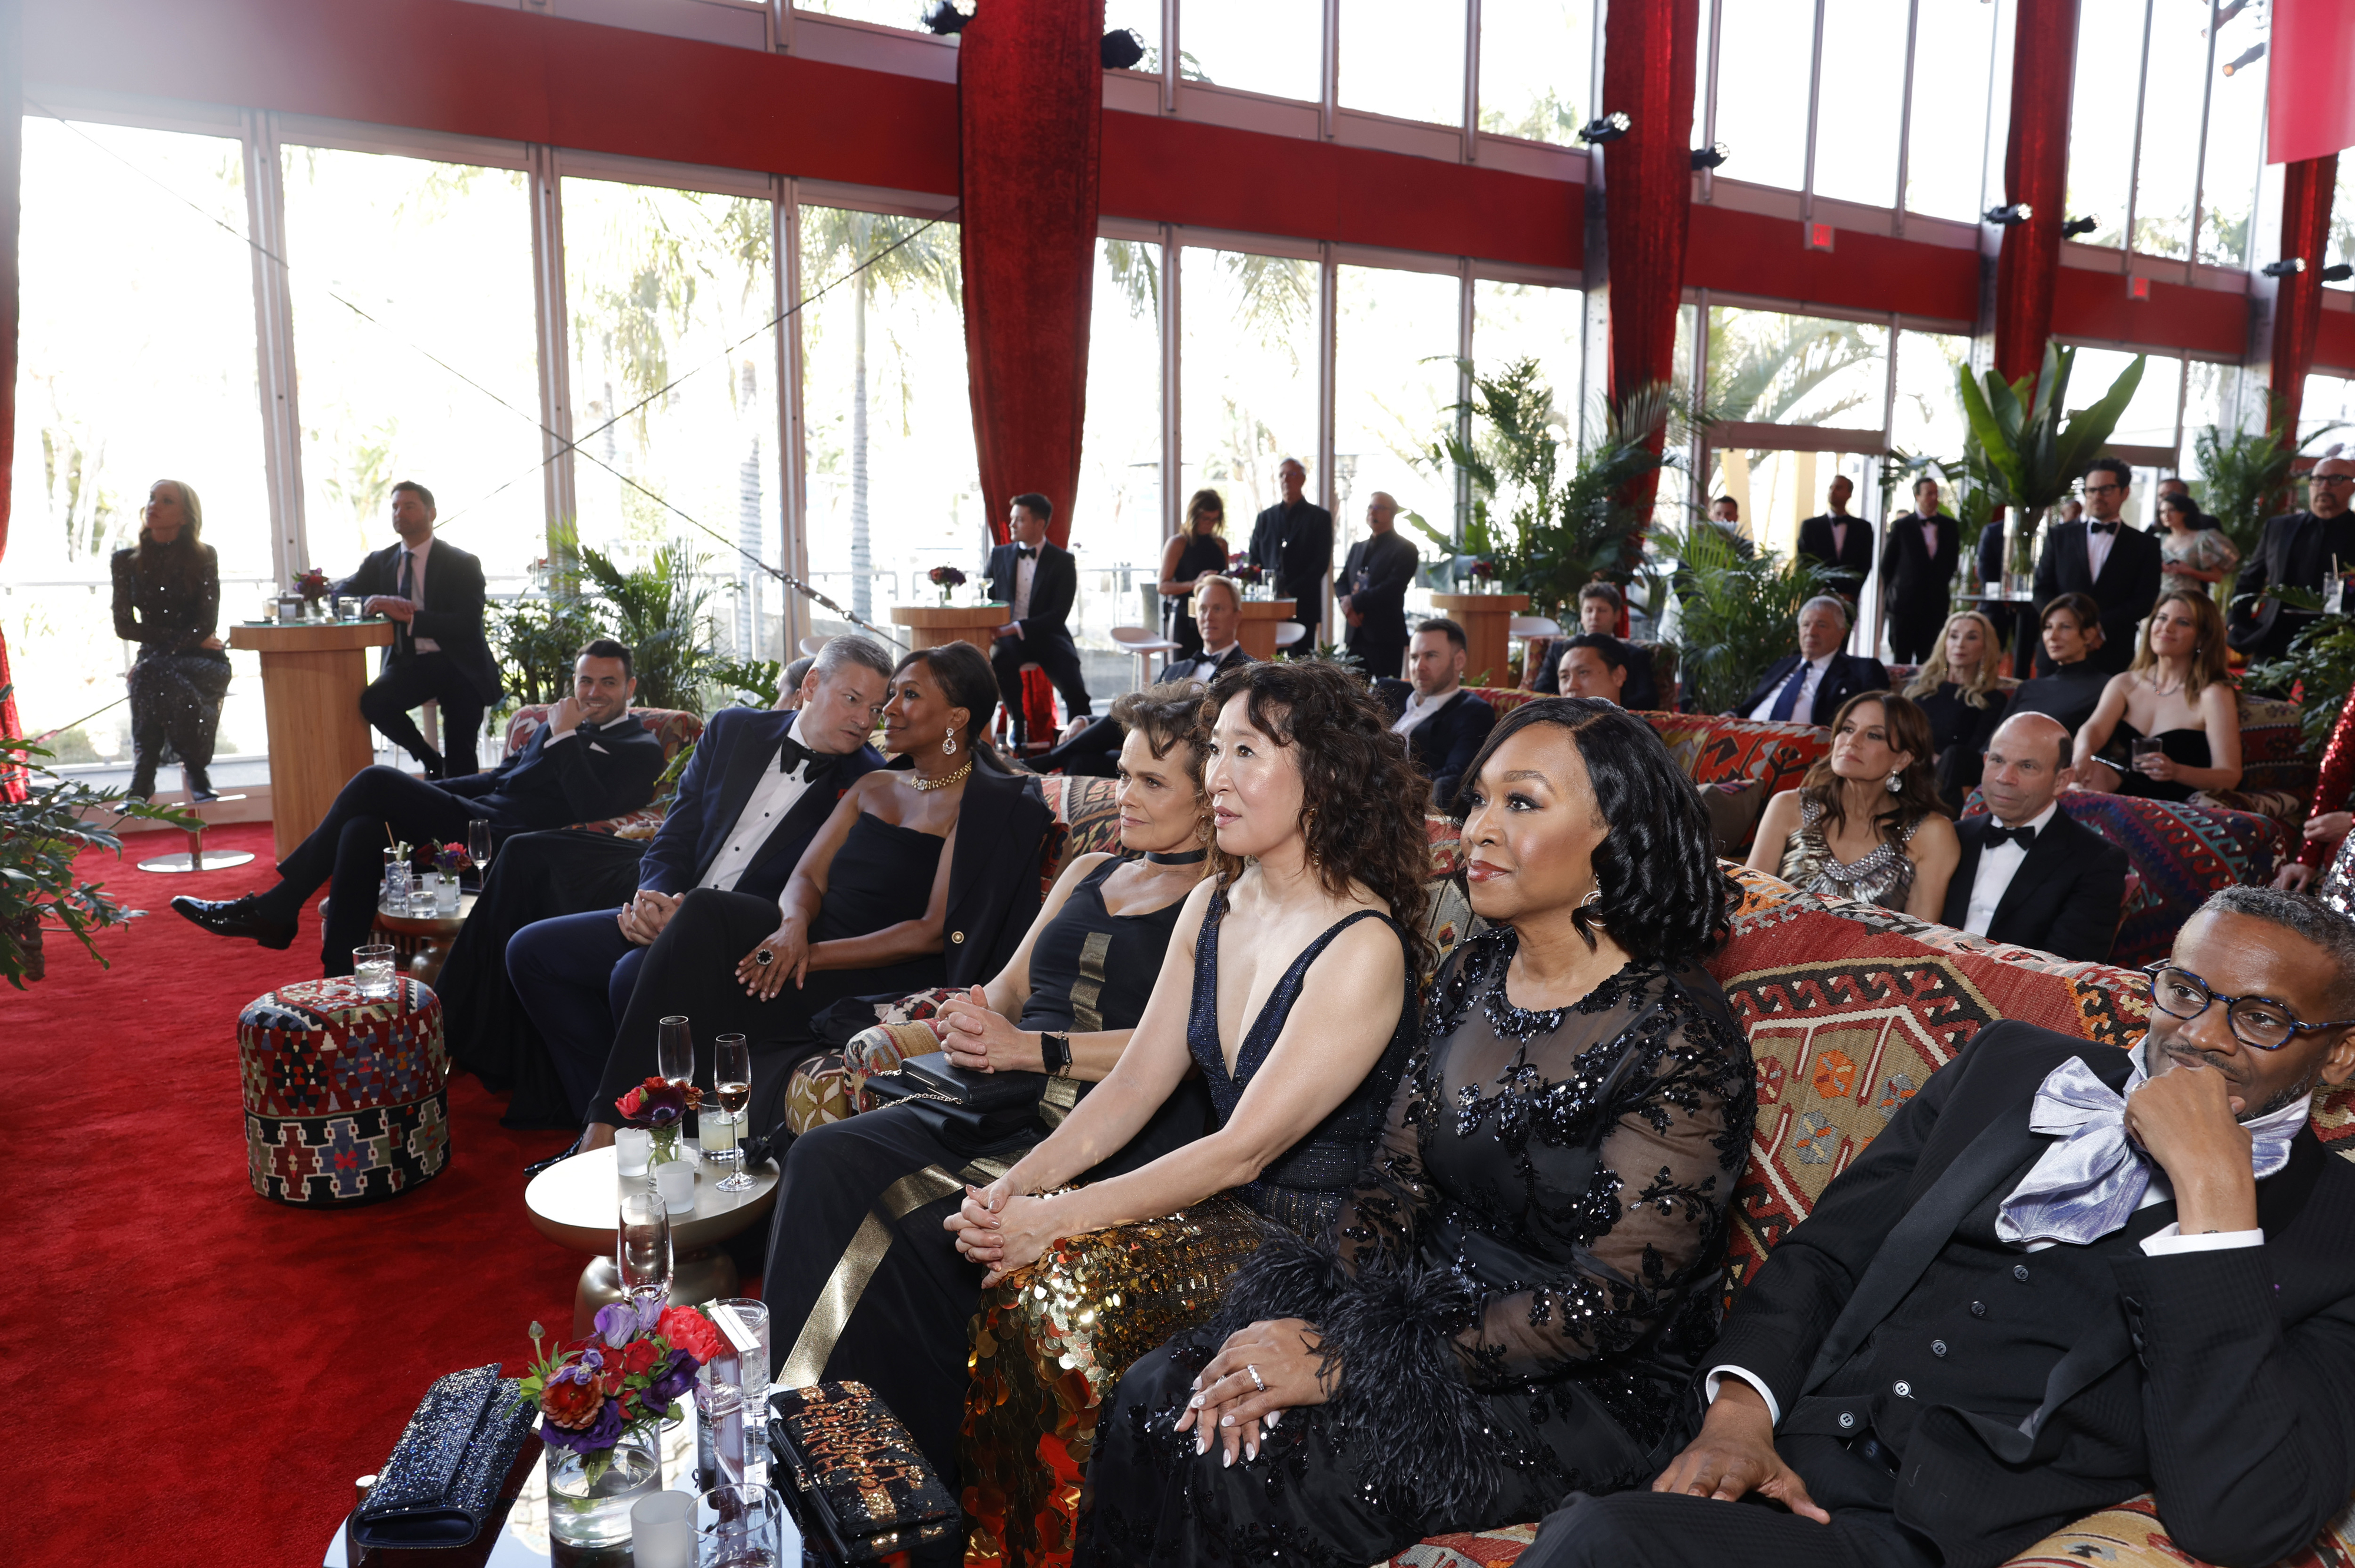 Guests seated at a formal event, including Sandra Oh and Shonda Rhimes, wearing elegant attire